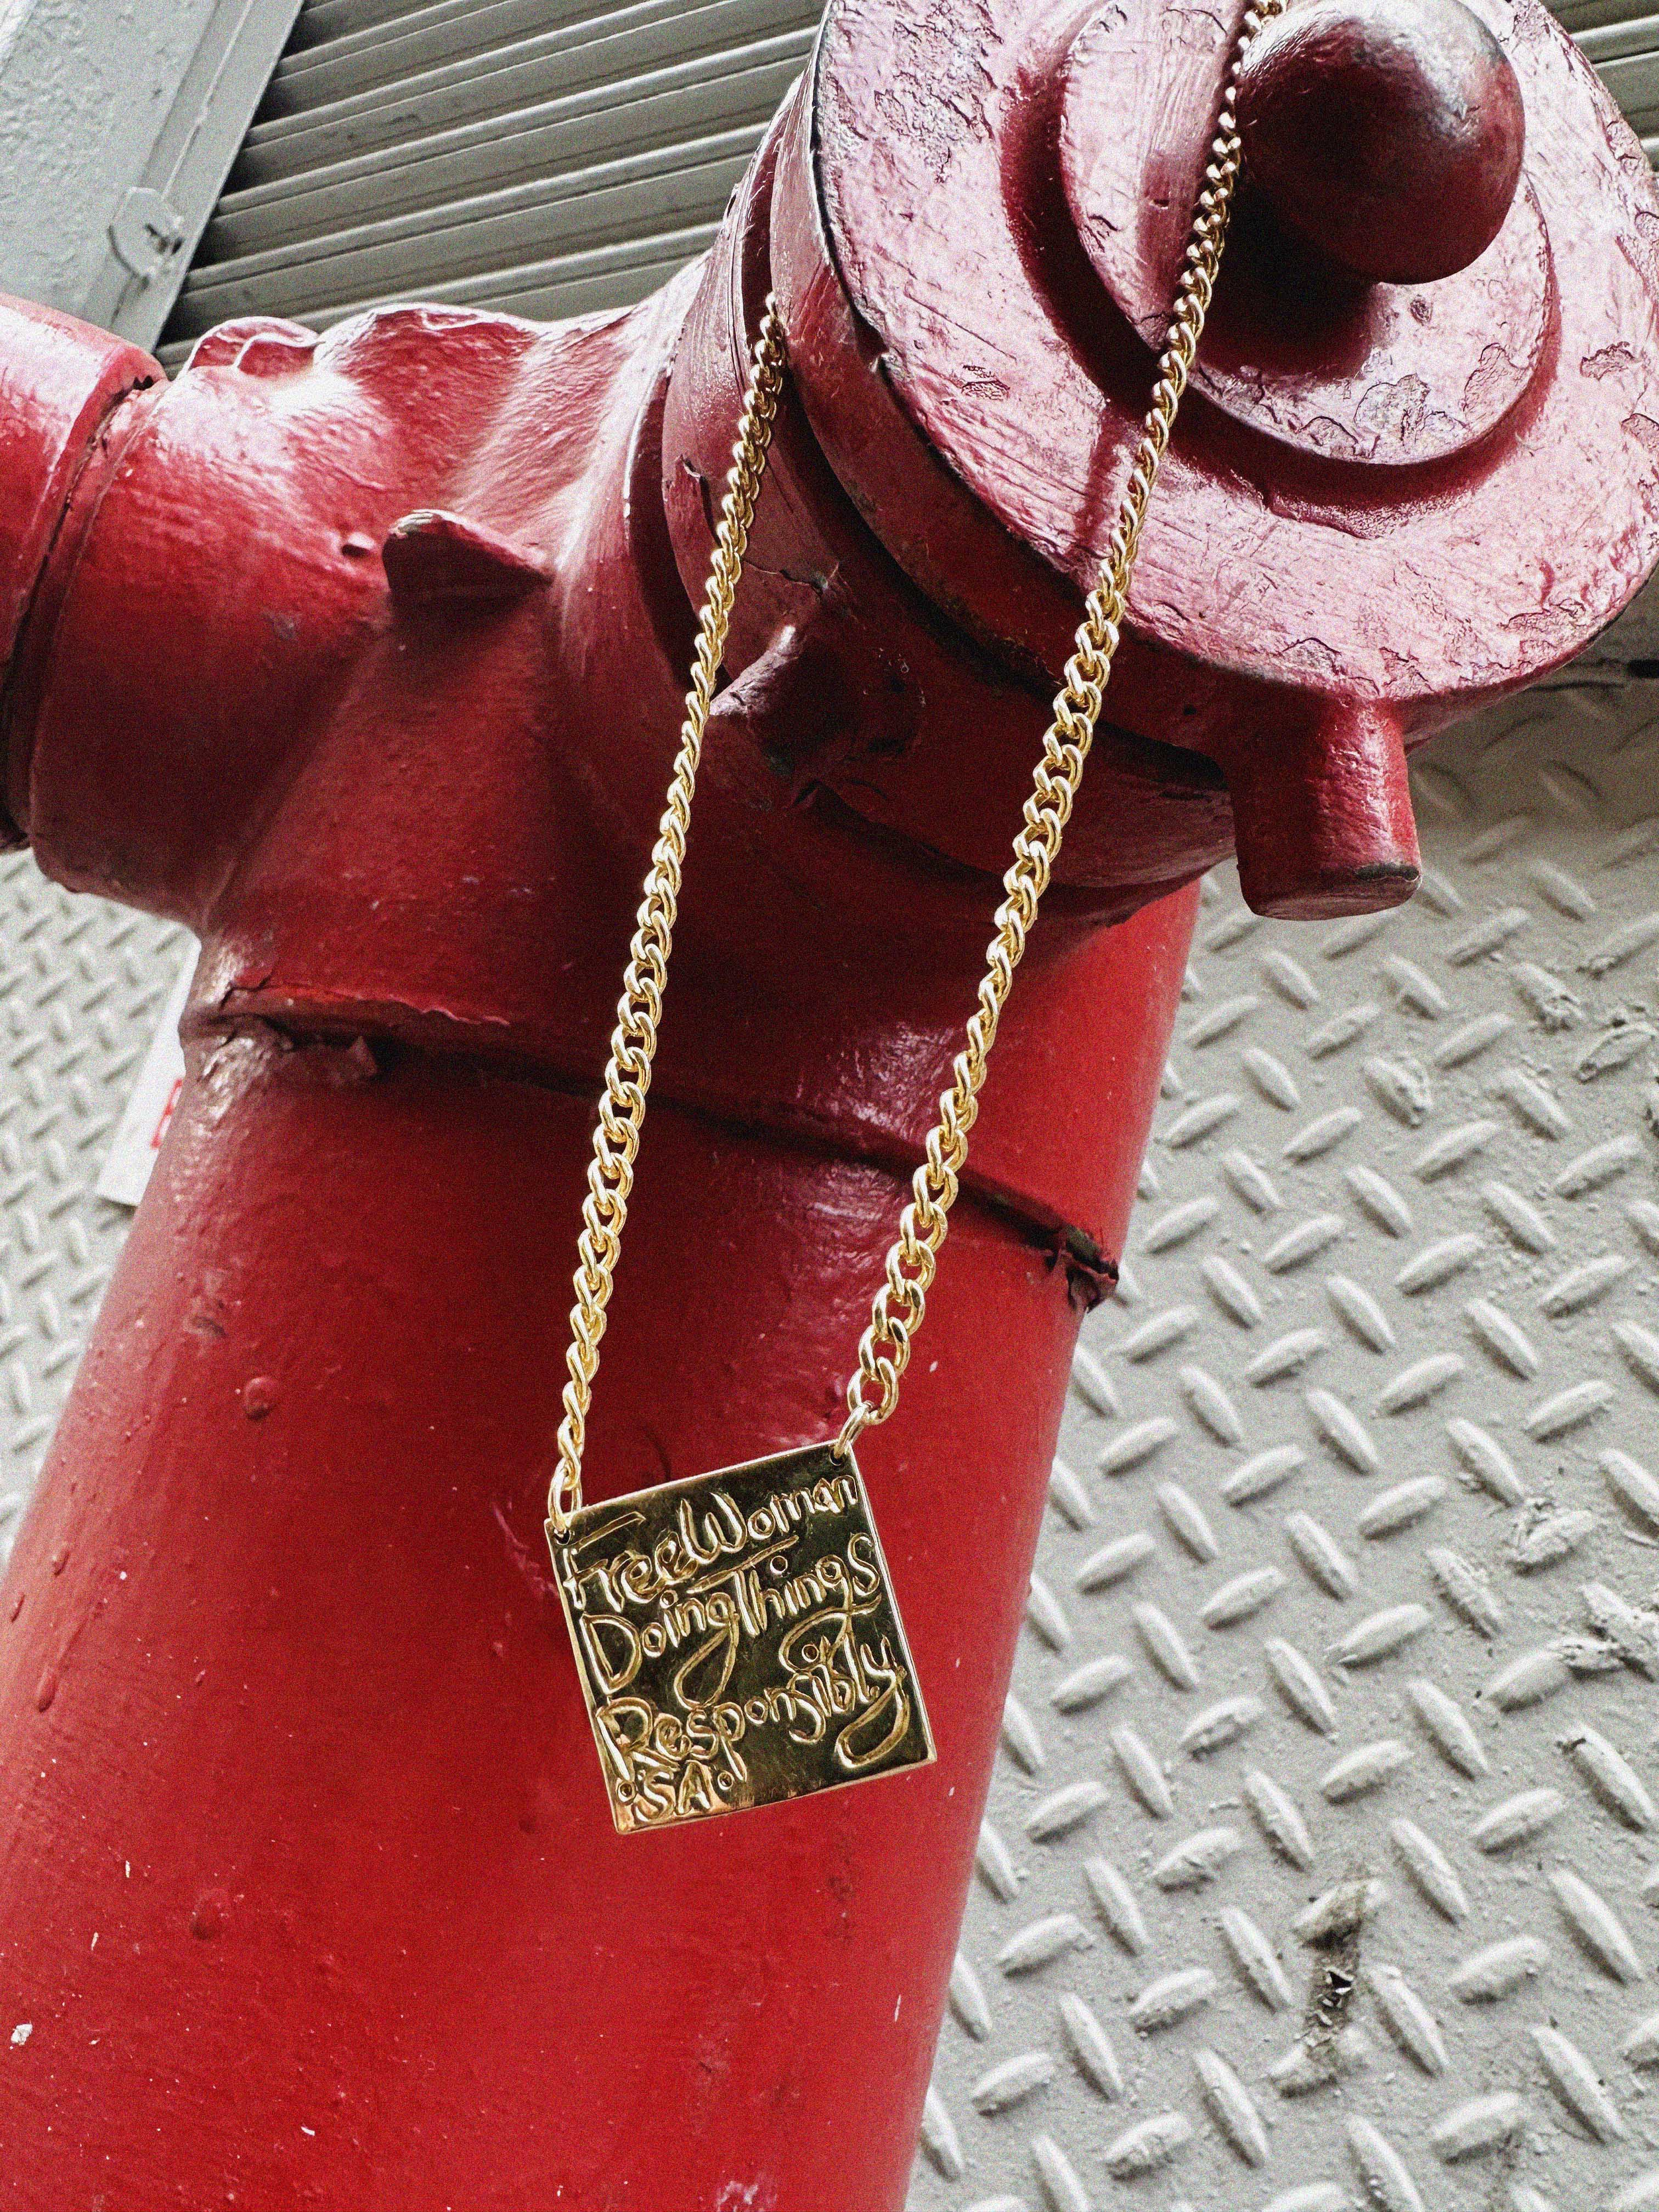 →FREE WOMAN NECKLACE← 14K GOLD FILLED CHAIN + BRASS FREE WOMAN SQUARE